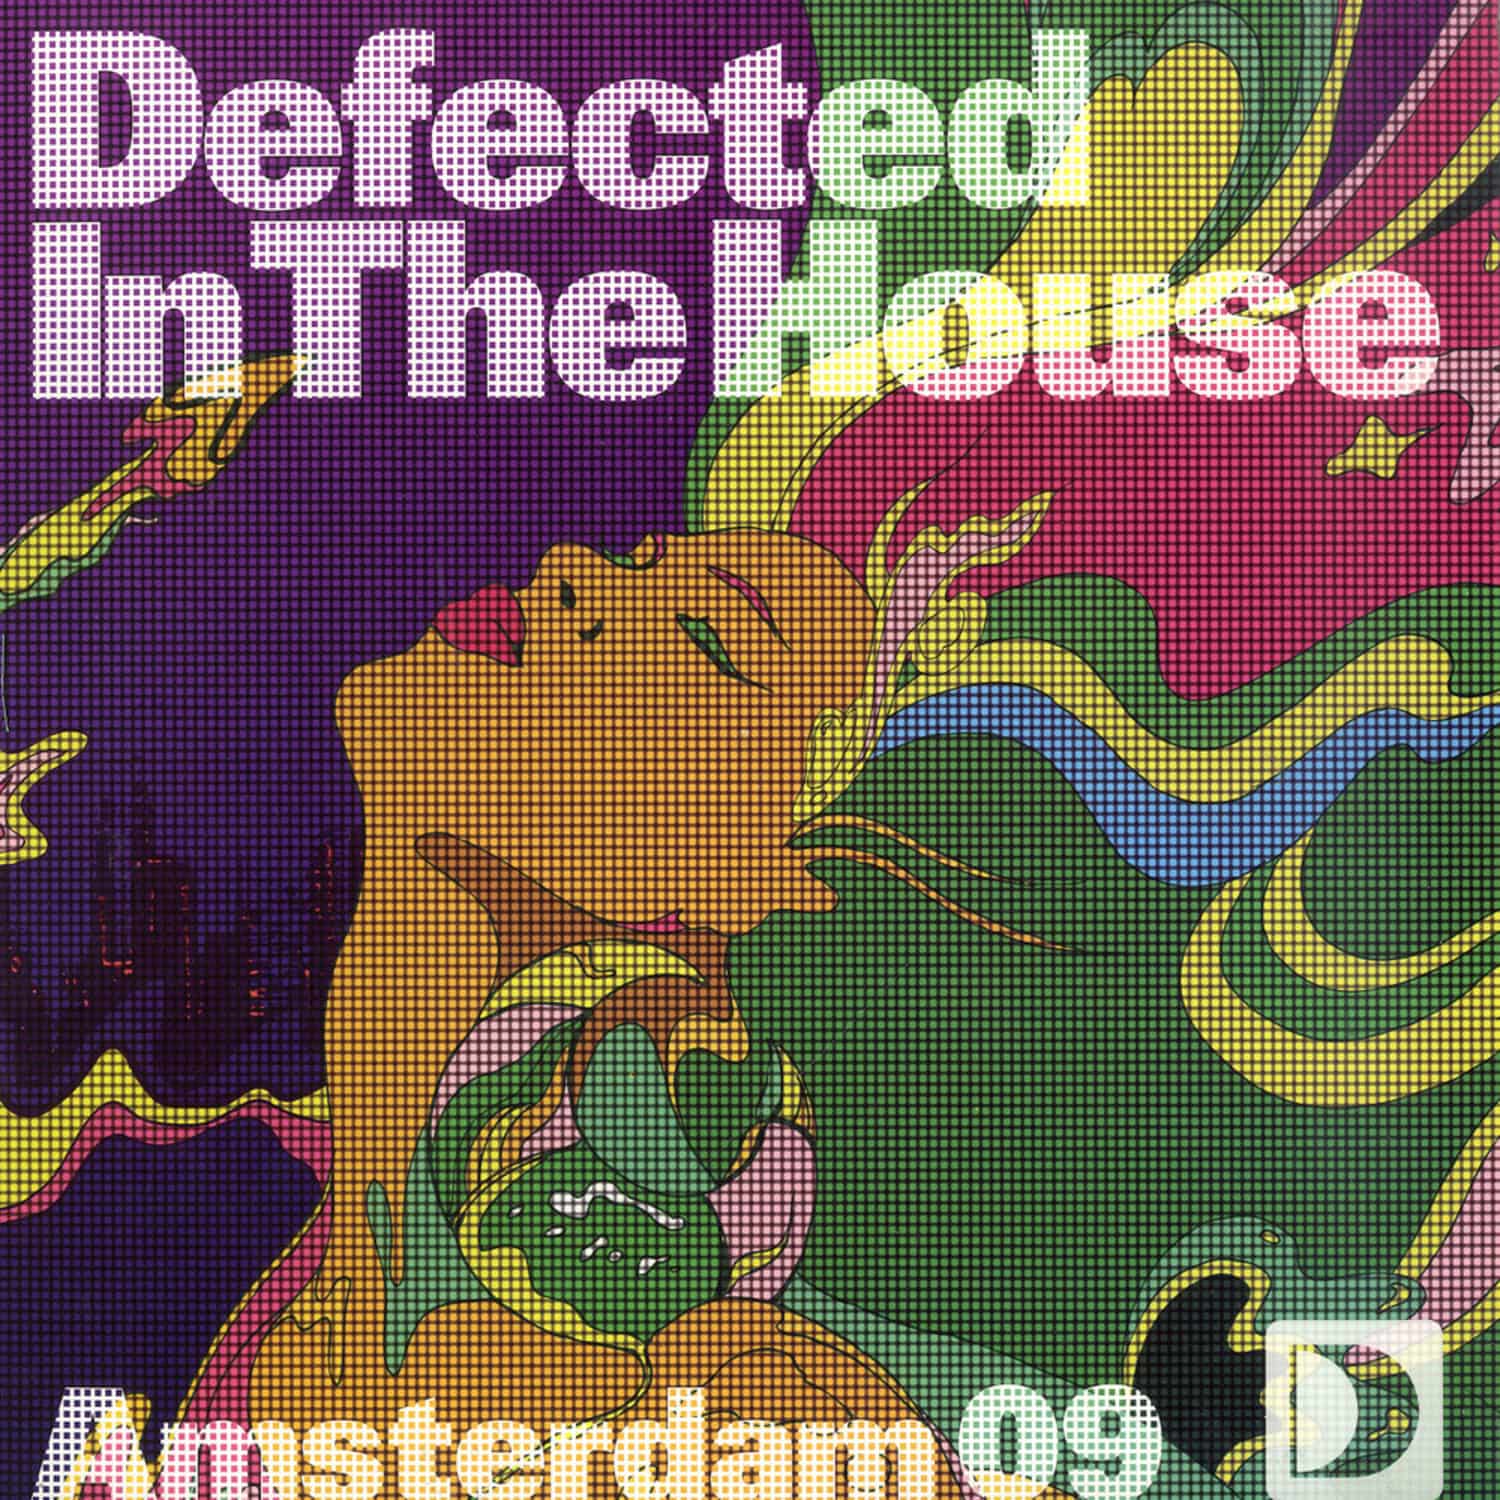 Defected In The House - AMSTERDAM 09 PART 2